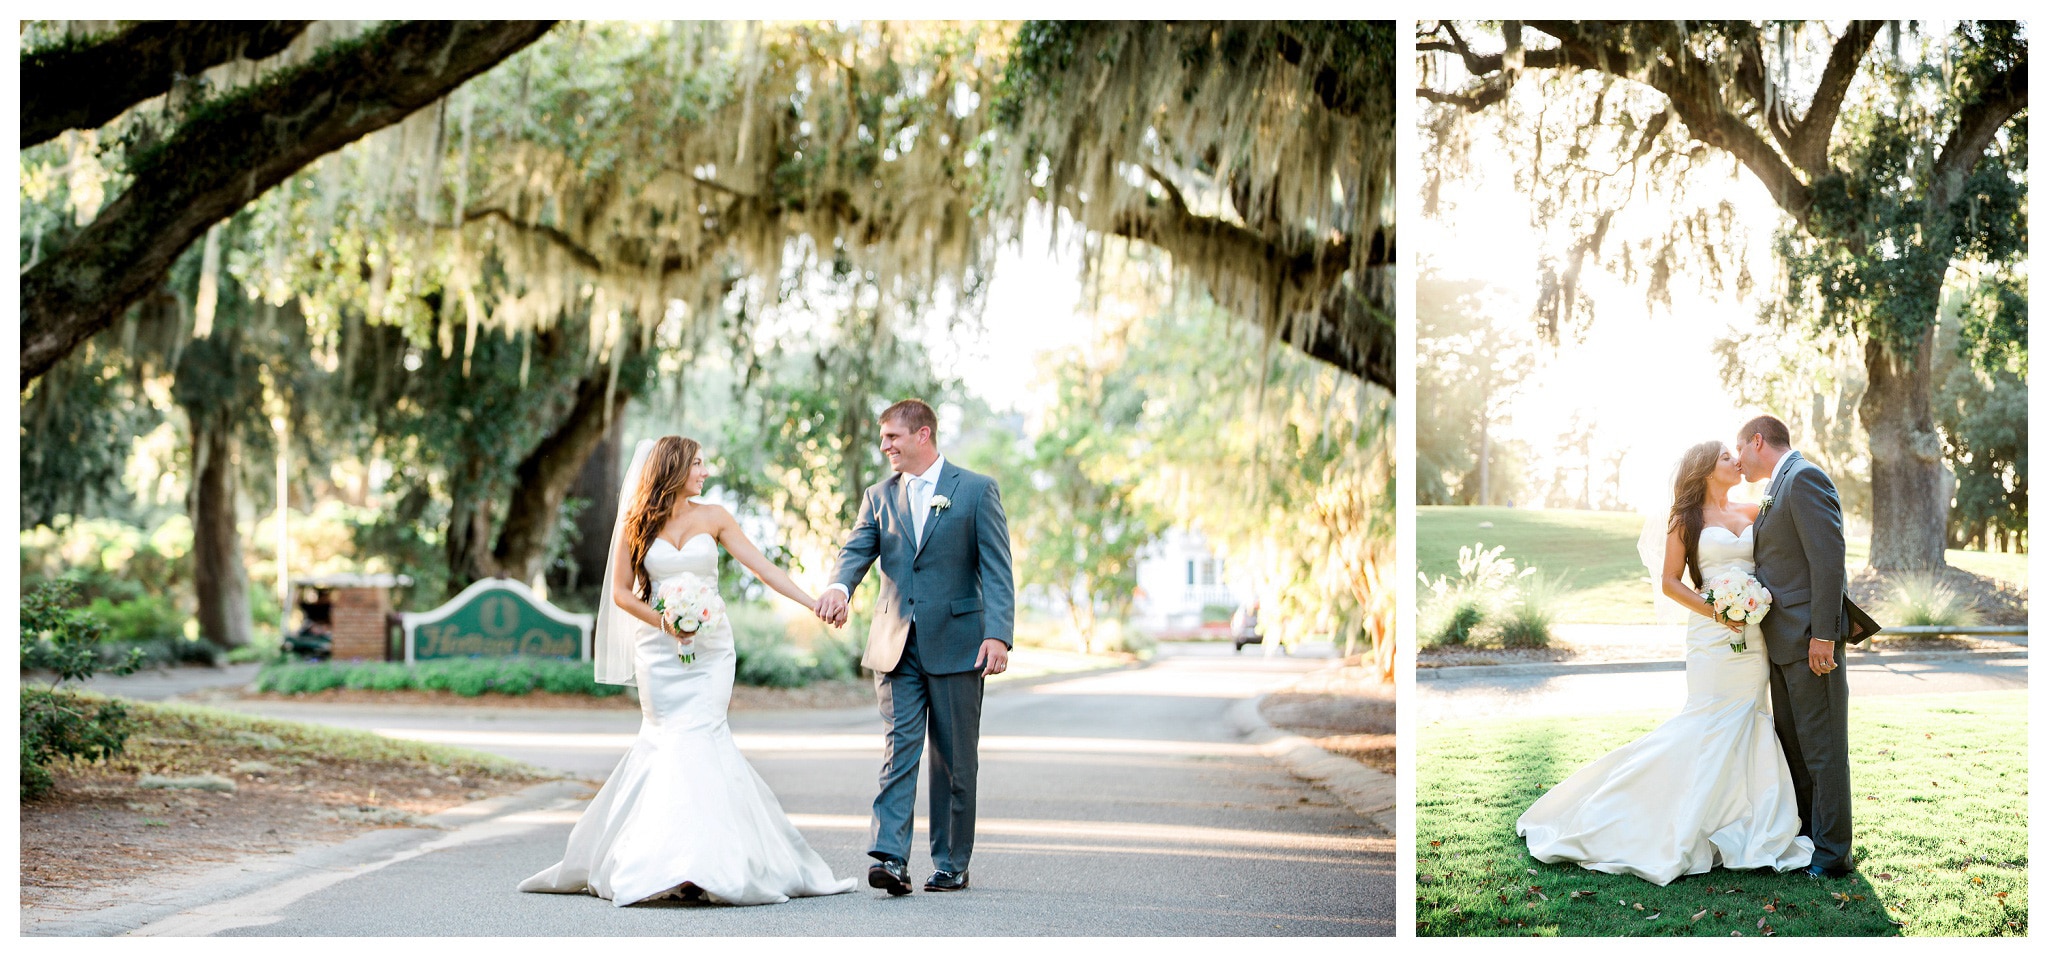 Mr. and Mrs. sharing Wed Kisses under the giant oak tree, Kay and Josh's wedding at the Heritage Plantation, Pawleys Island, South Carolina on September 19, 2015 Heritage Plantation Southern wedding, Pawleys Island, South Carolina Venue and Catering: Heritage Club, Pawleys Island Music: Paul Matthews Entertainment Brides dress: The Little White Dress Cake: Buttercream Cakes and Catering Event Rentals: Eventworks Photographer: One Life Photography